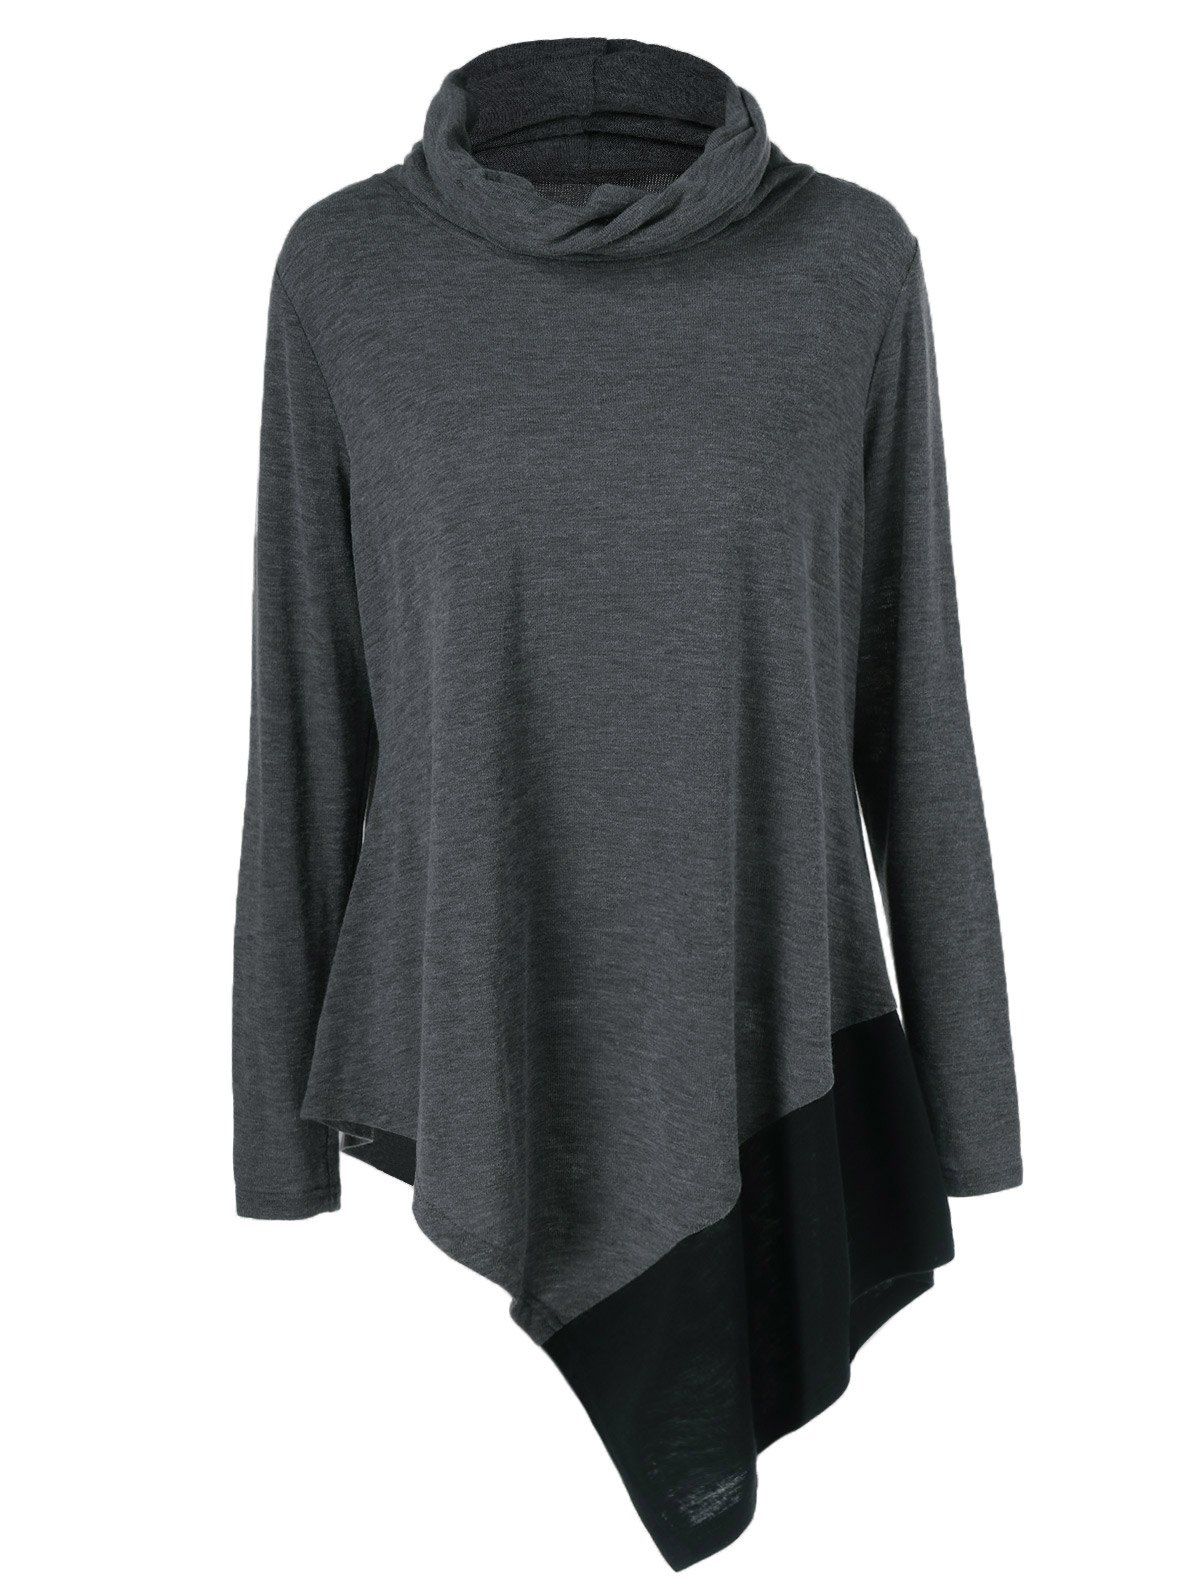 [41% OFF] 2021 Plus Size Cowl Neck Asymmetrical Pullover In BLACK GREY ...